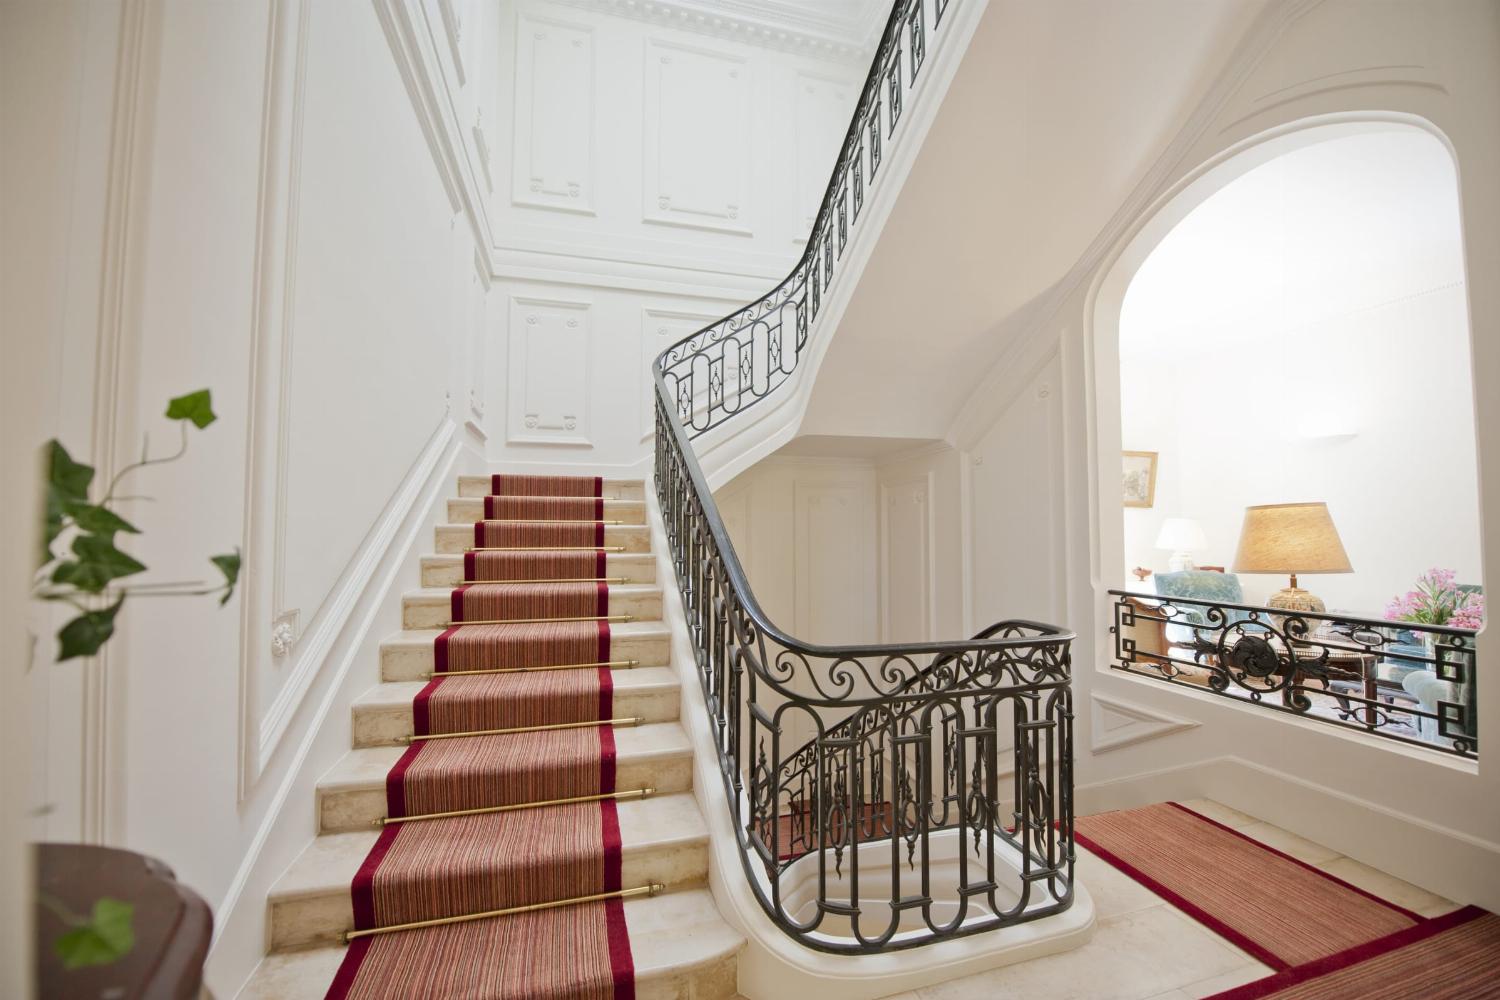 Staircase | Holiday château in the South of France